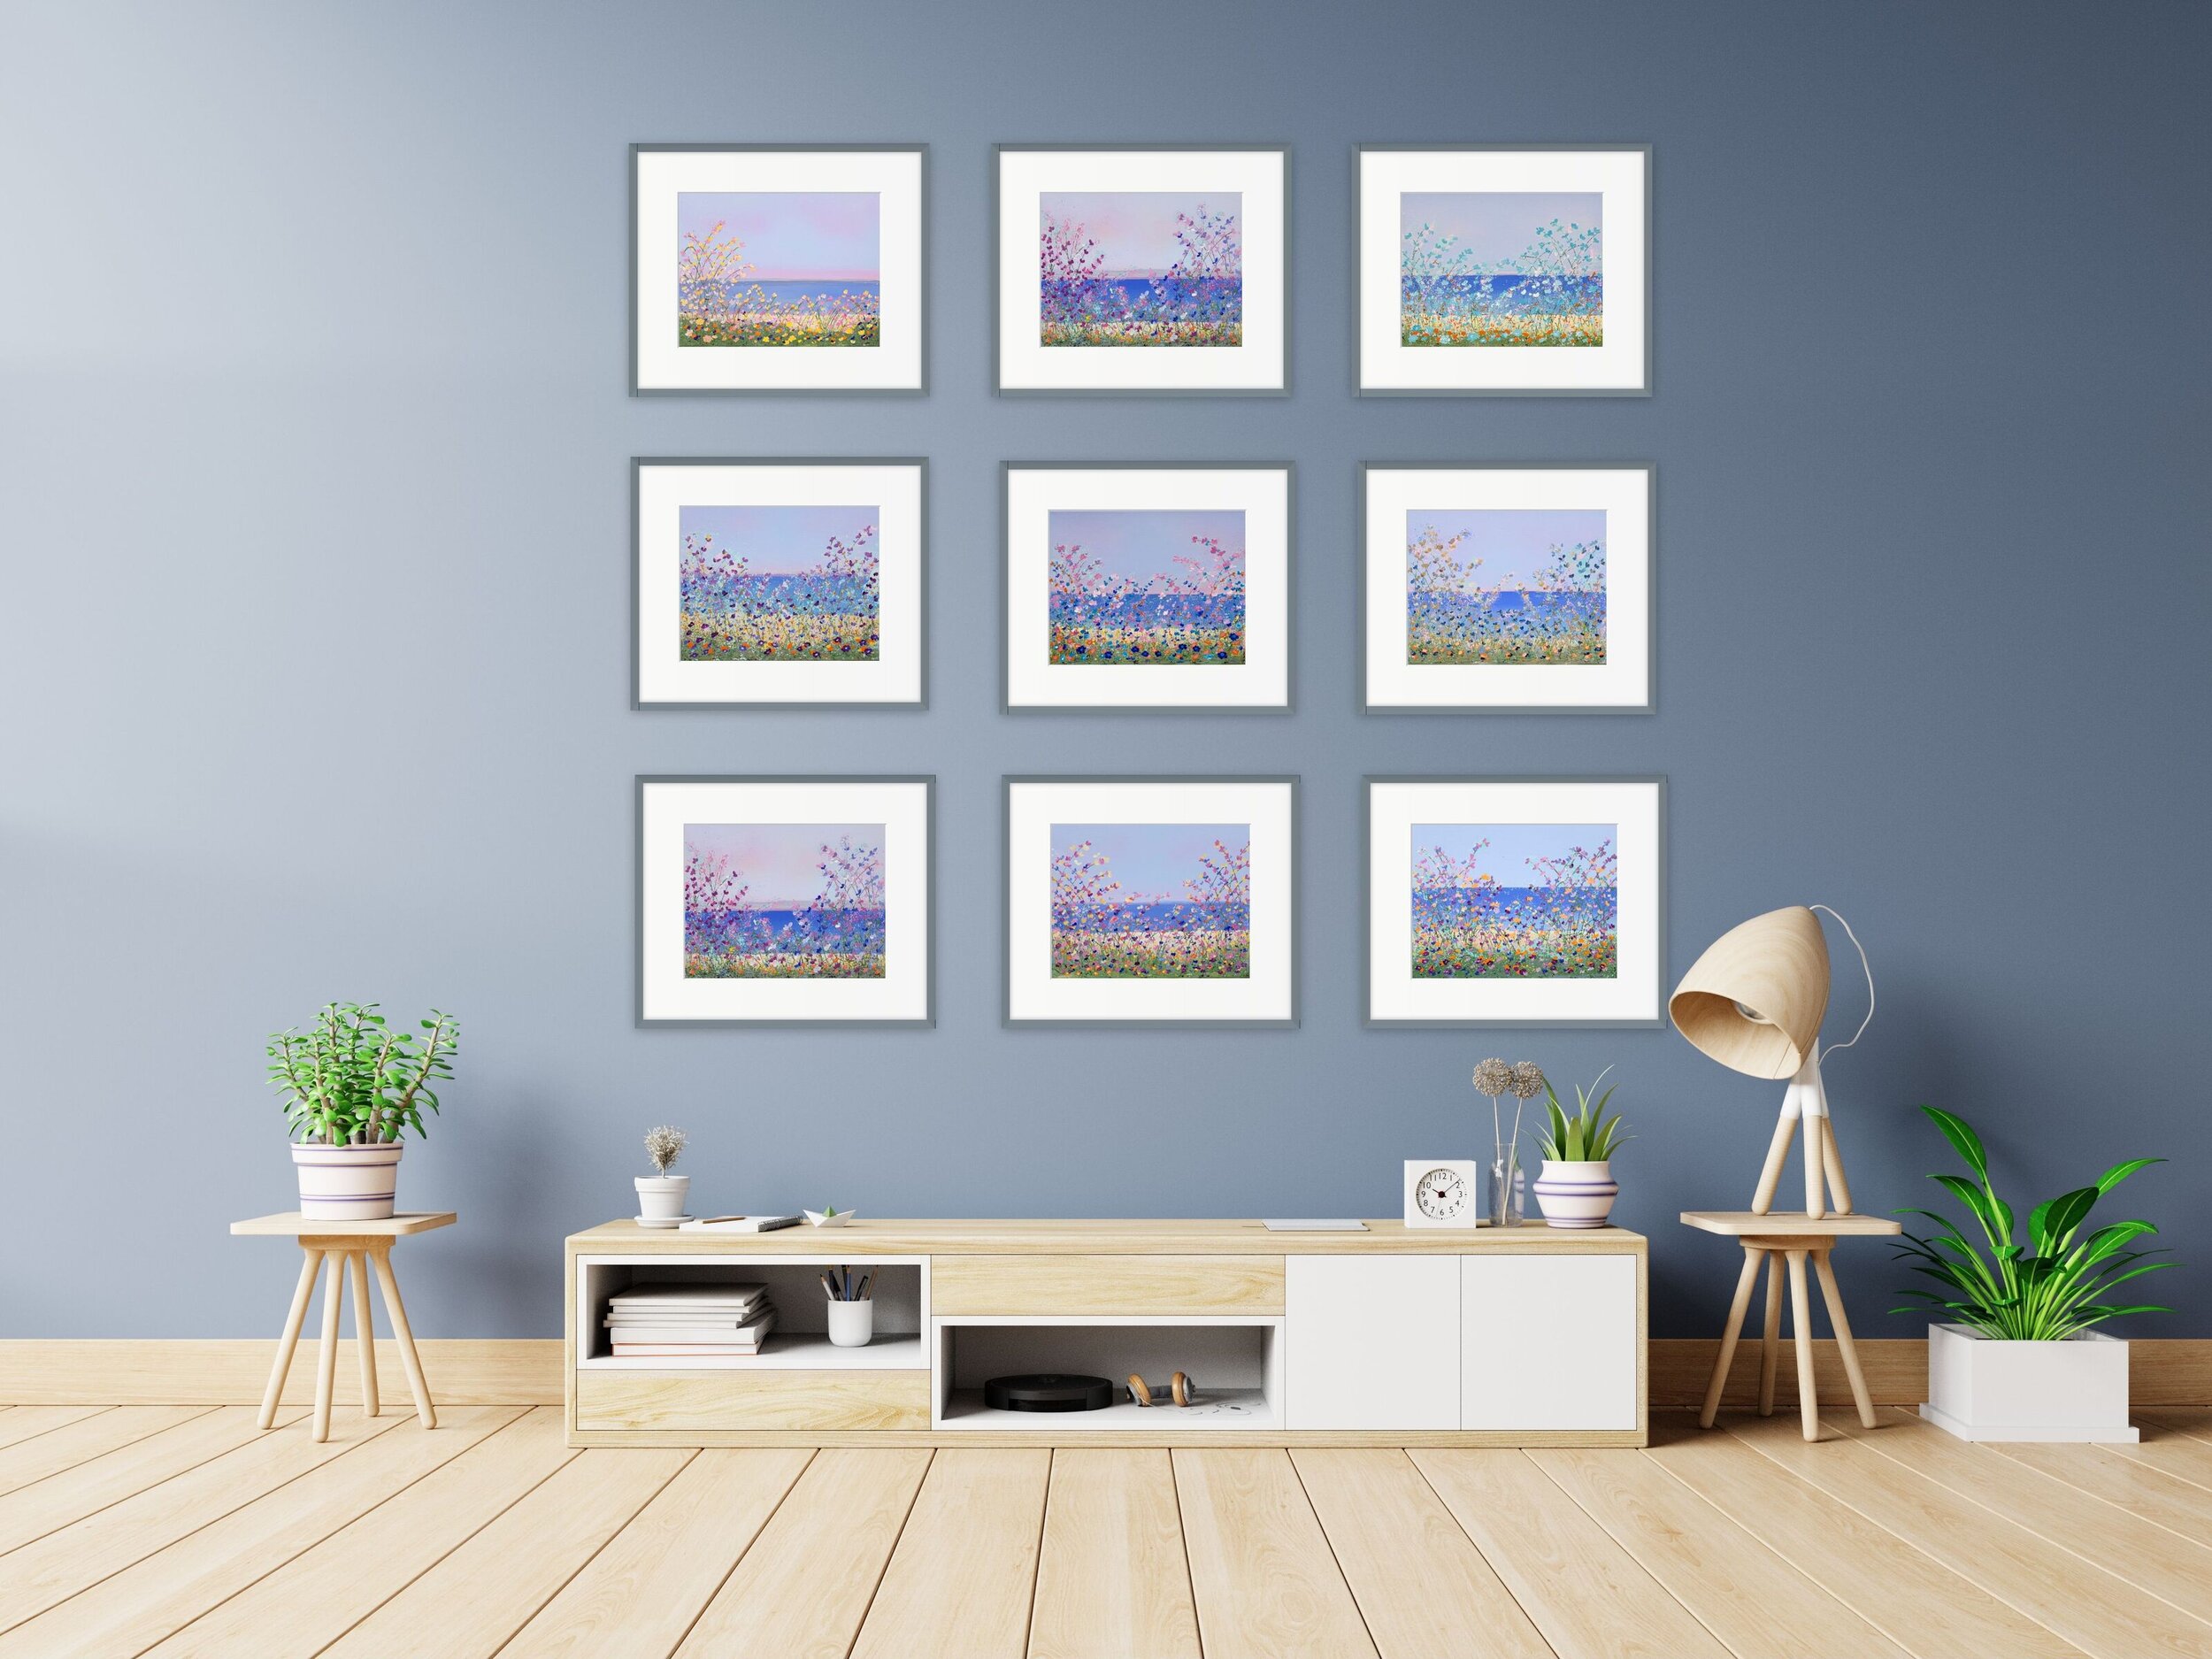 nine lakeside floral evidence based paintings on gray wall